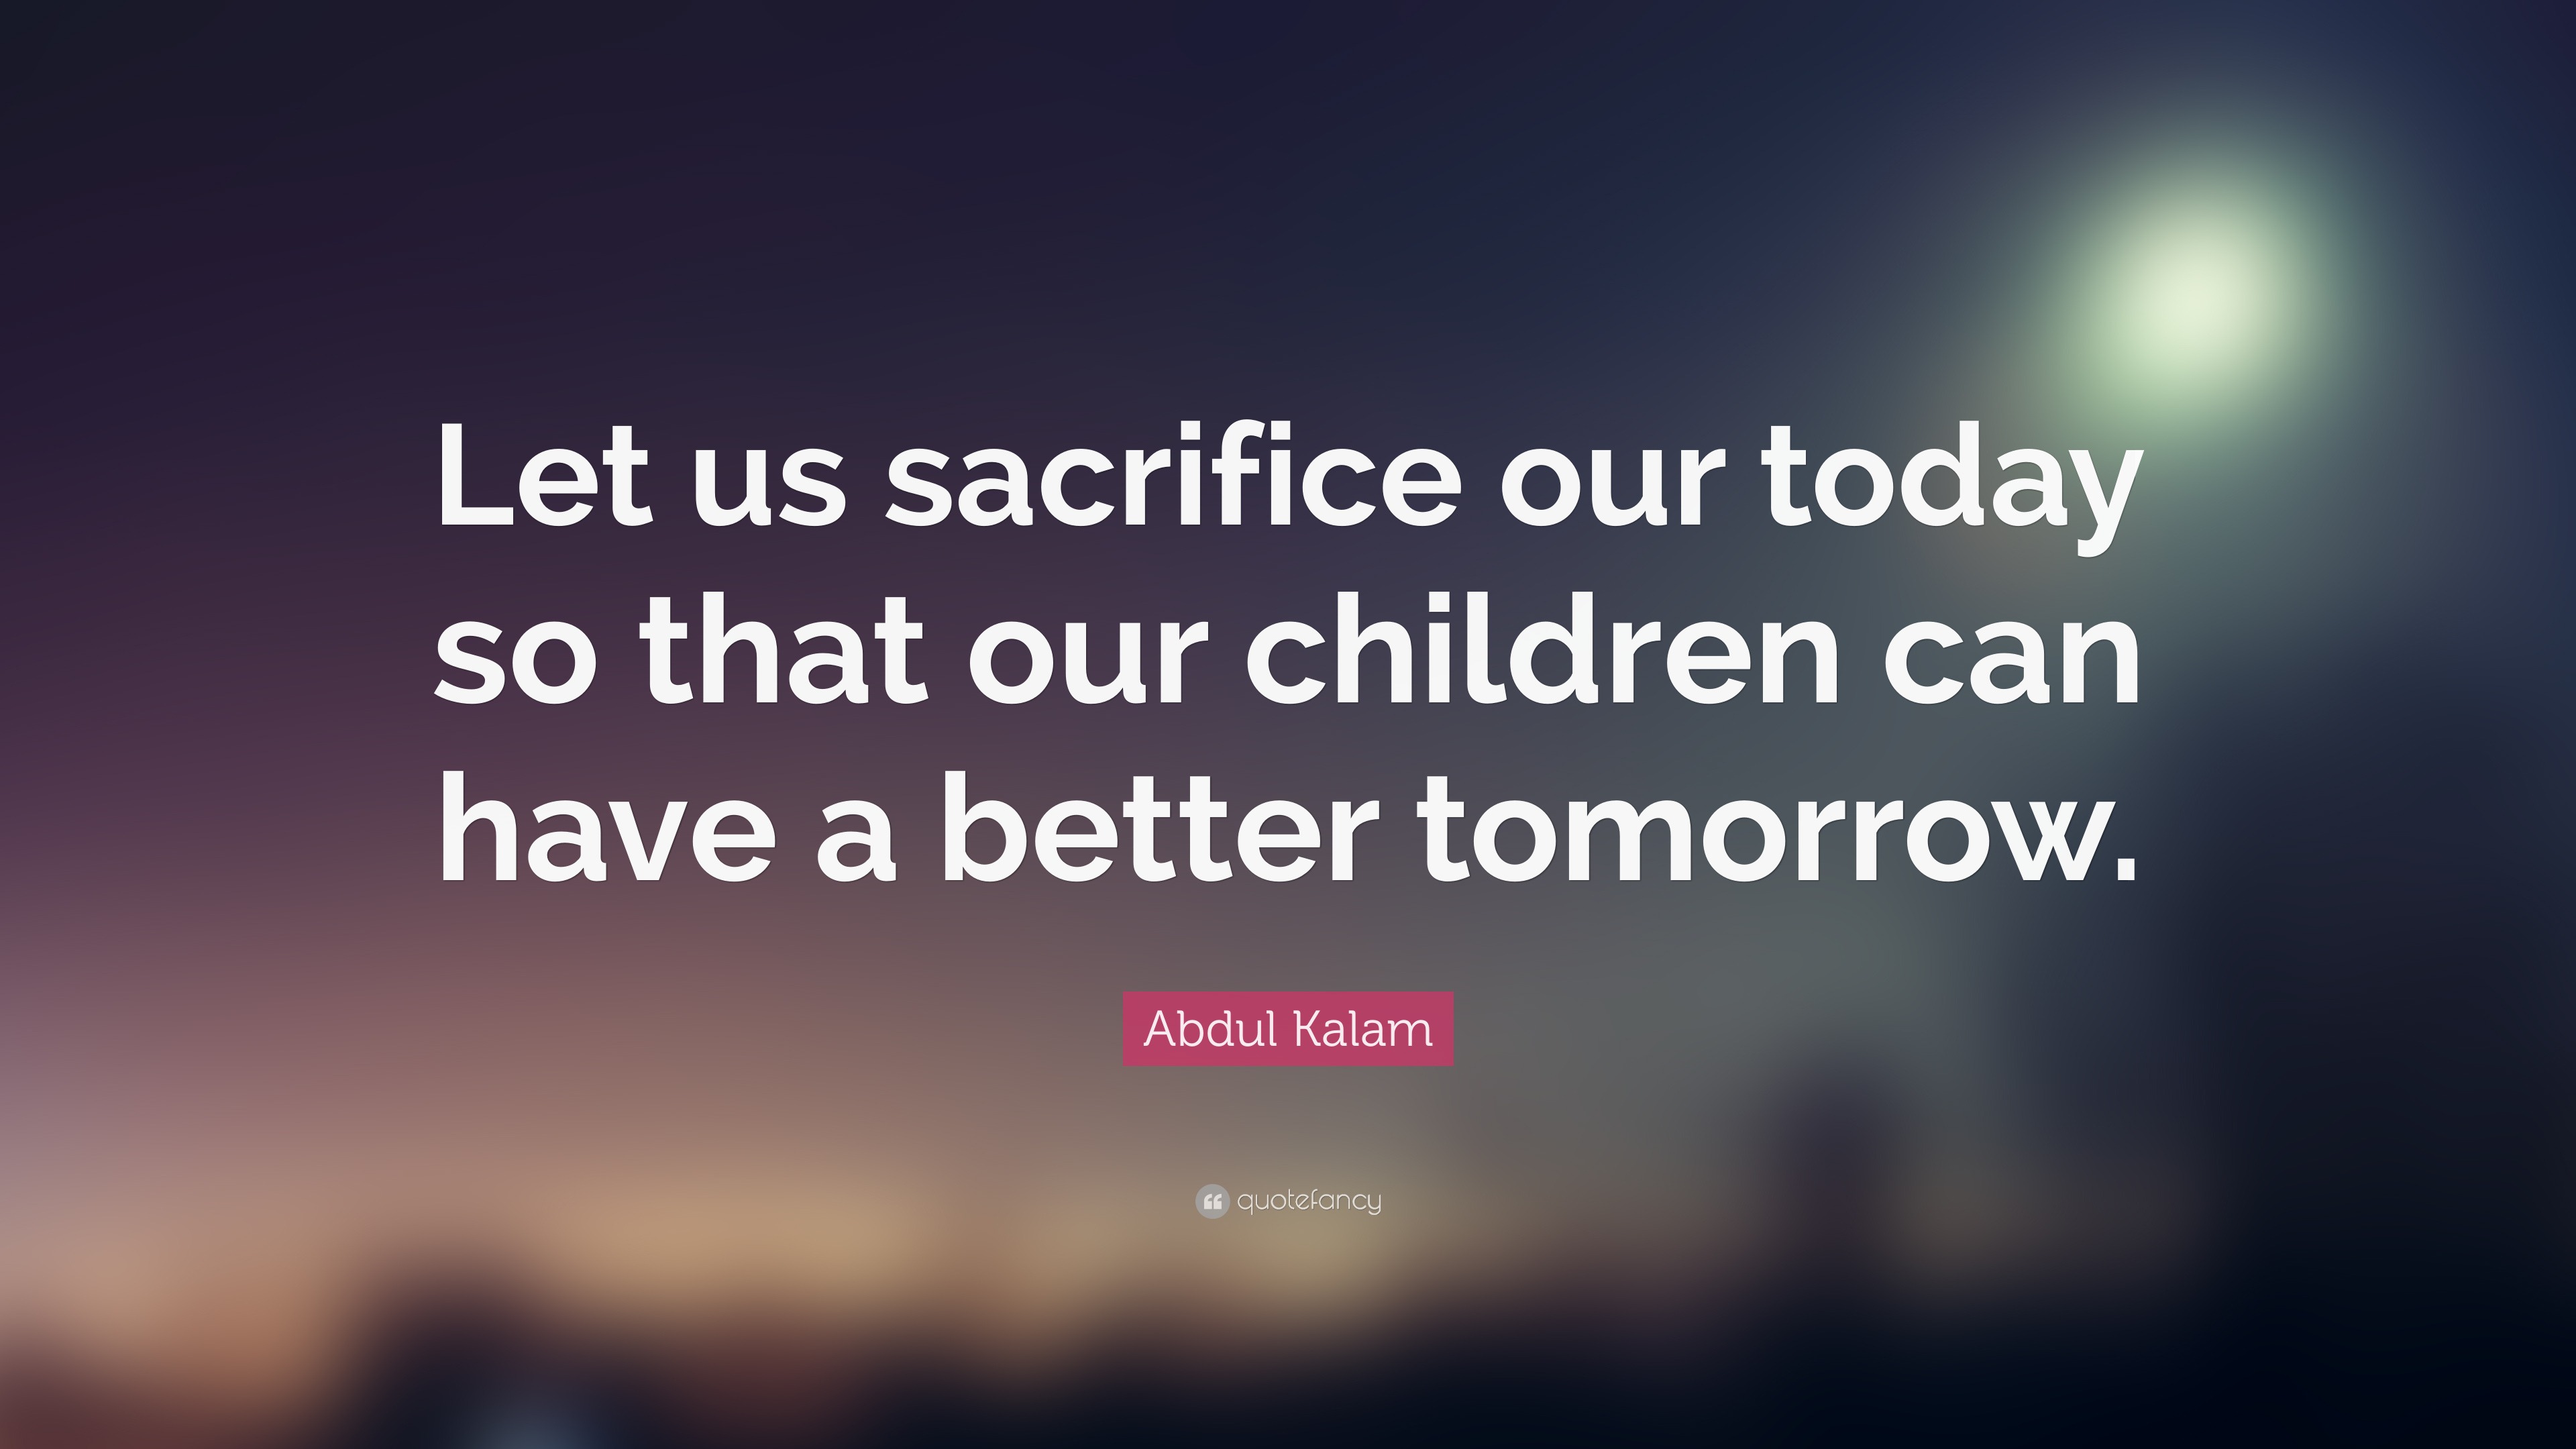 Abdul Kalam Quote “Let us sacrifice our today so that our